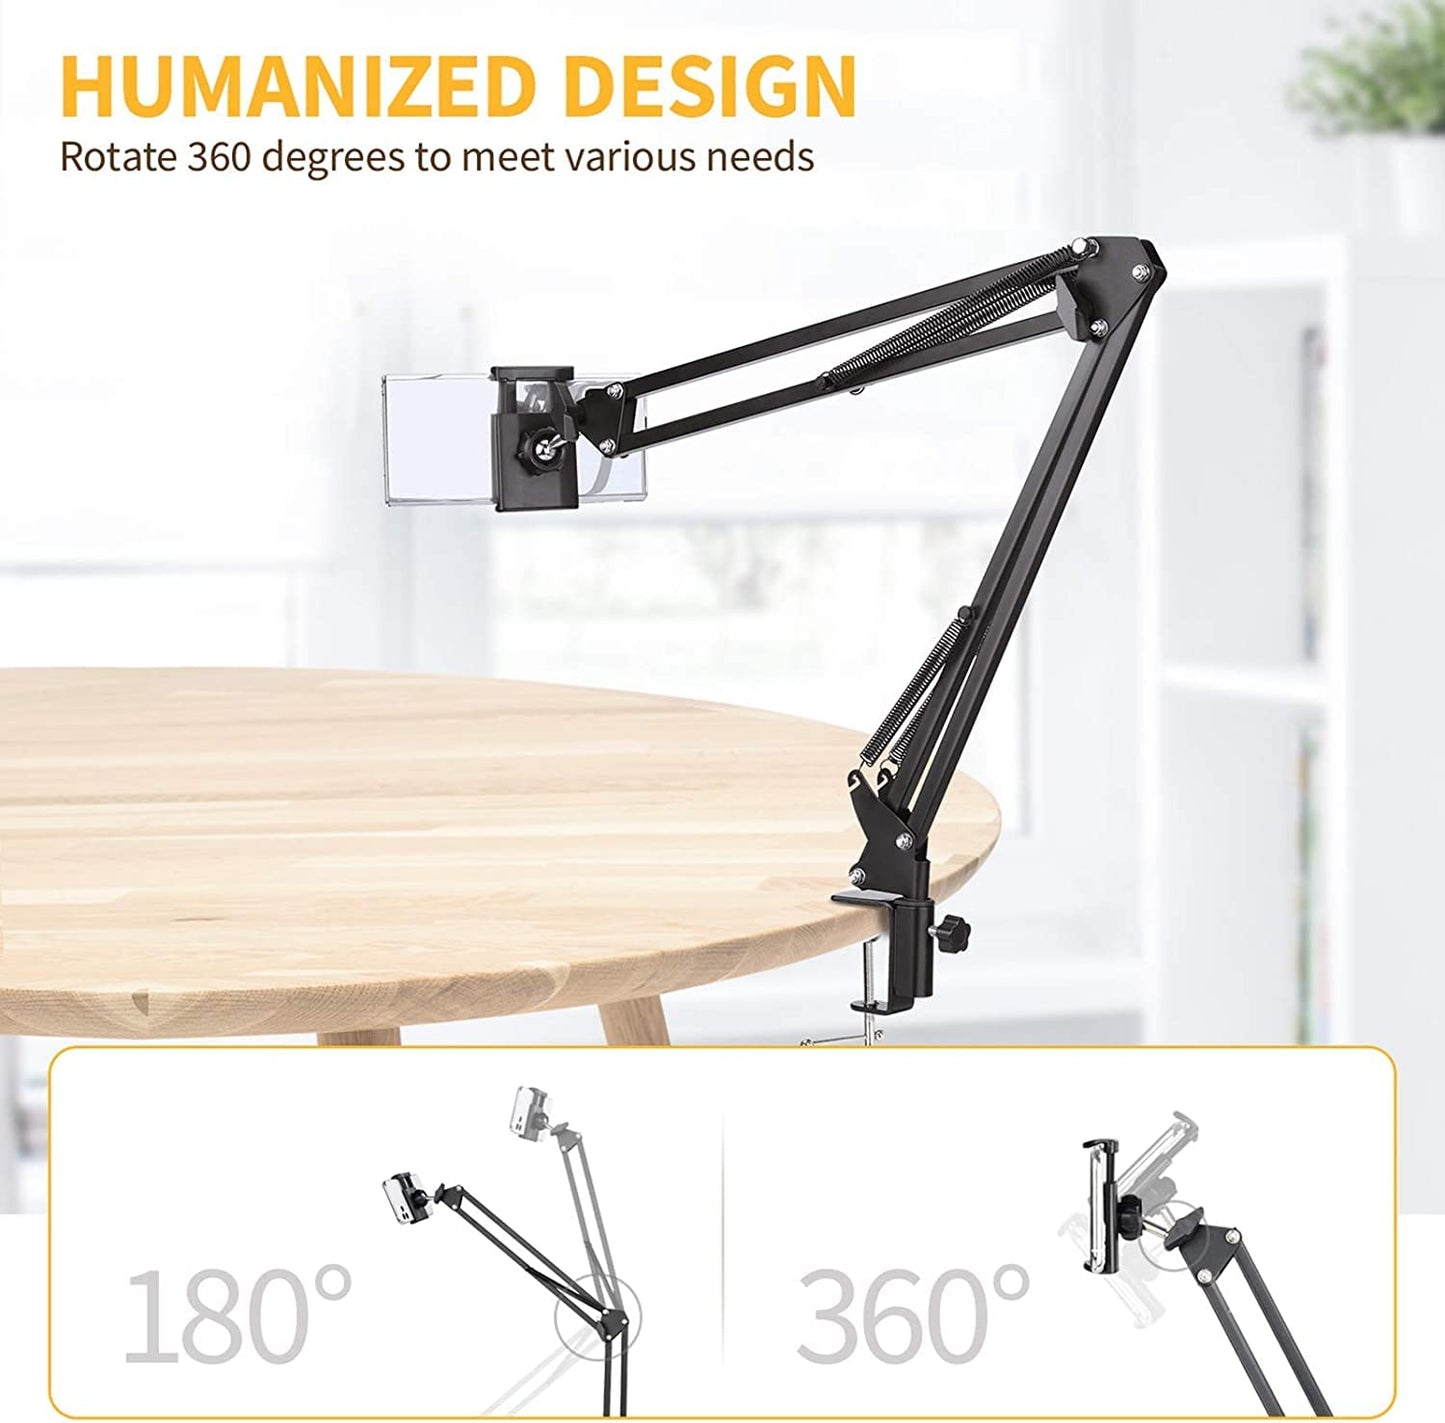 ADZOY Universal Professional 360 Rotation Overhead Suspension Arm Stand with 2 Bracket for 3.5-11.5 inch Mobile Phones and Tabs for Baking,Craft,Calligraphy,Drawing, Broadcasting & Recording